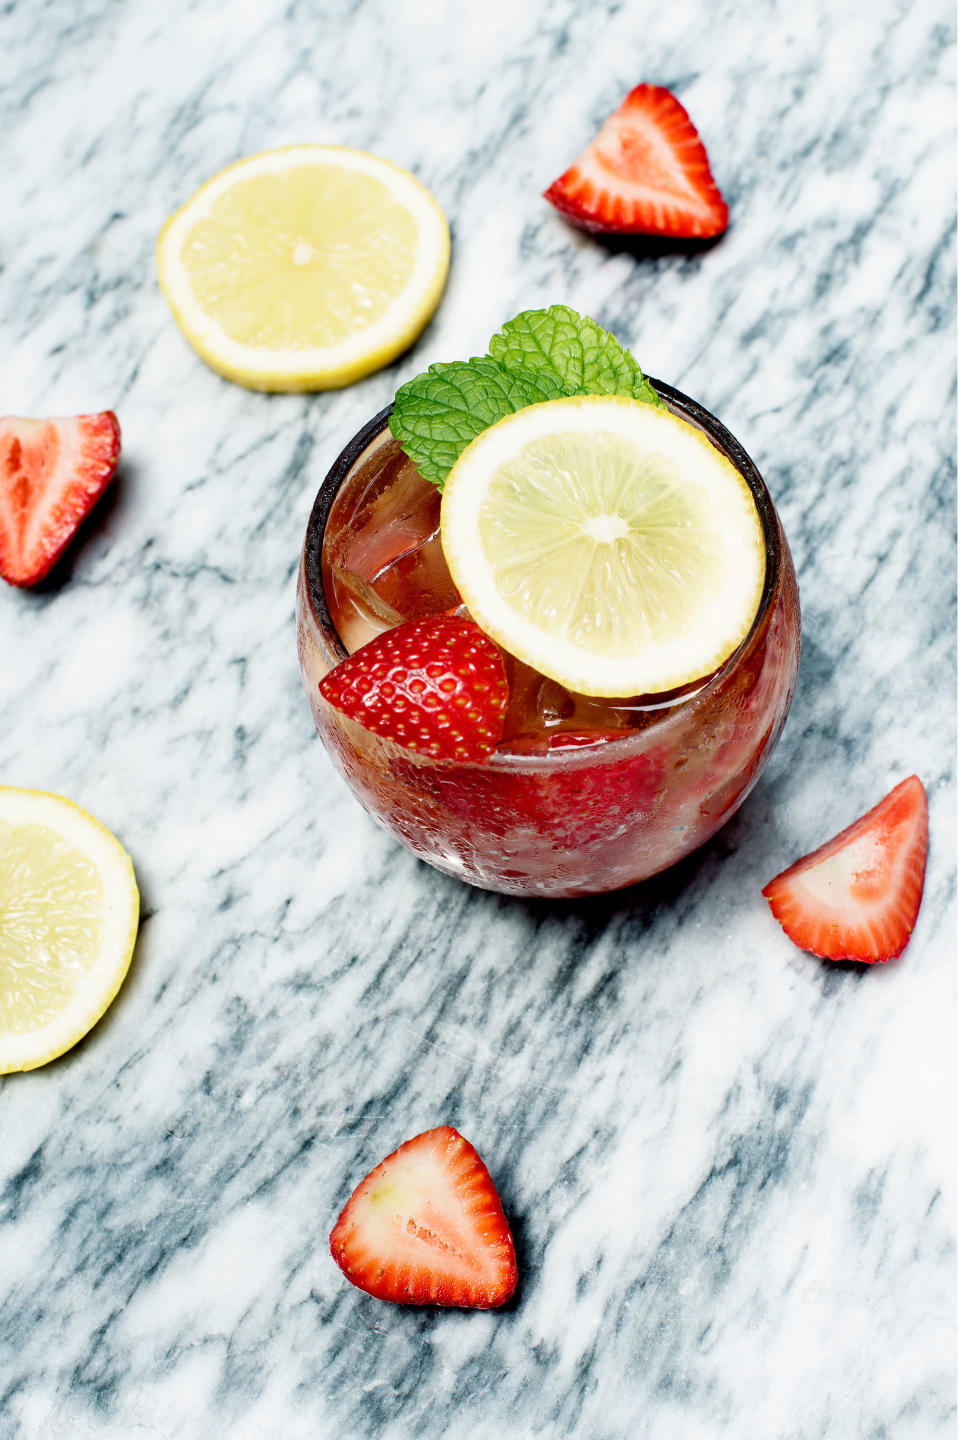 <strong>Summer Solstice Spritz</strong><br><br>Perfect for the week before payday, this rosé spritz is easy on the ingredient list and super-quick to whip up.<br><br><strong>Ingredients</strong><br>125ml dry rosé wine<br>50ml sparkling water or soda<br>3 strawberries<br><br><em>Optional</em><br>Sprig of mint<br>Slice of lemon<br><br><strong>Method</strong><br>Muddle the strawberries at the bottom of a large wine glass and fill with ice. Add the wine and top with soda. Garnish with the mint and lemon if you're using them.<br><br><em>Serves 1. </em><span class="copyright">Photographed by Roxana Azar.</span>